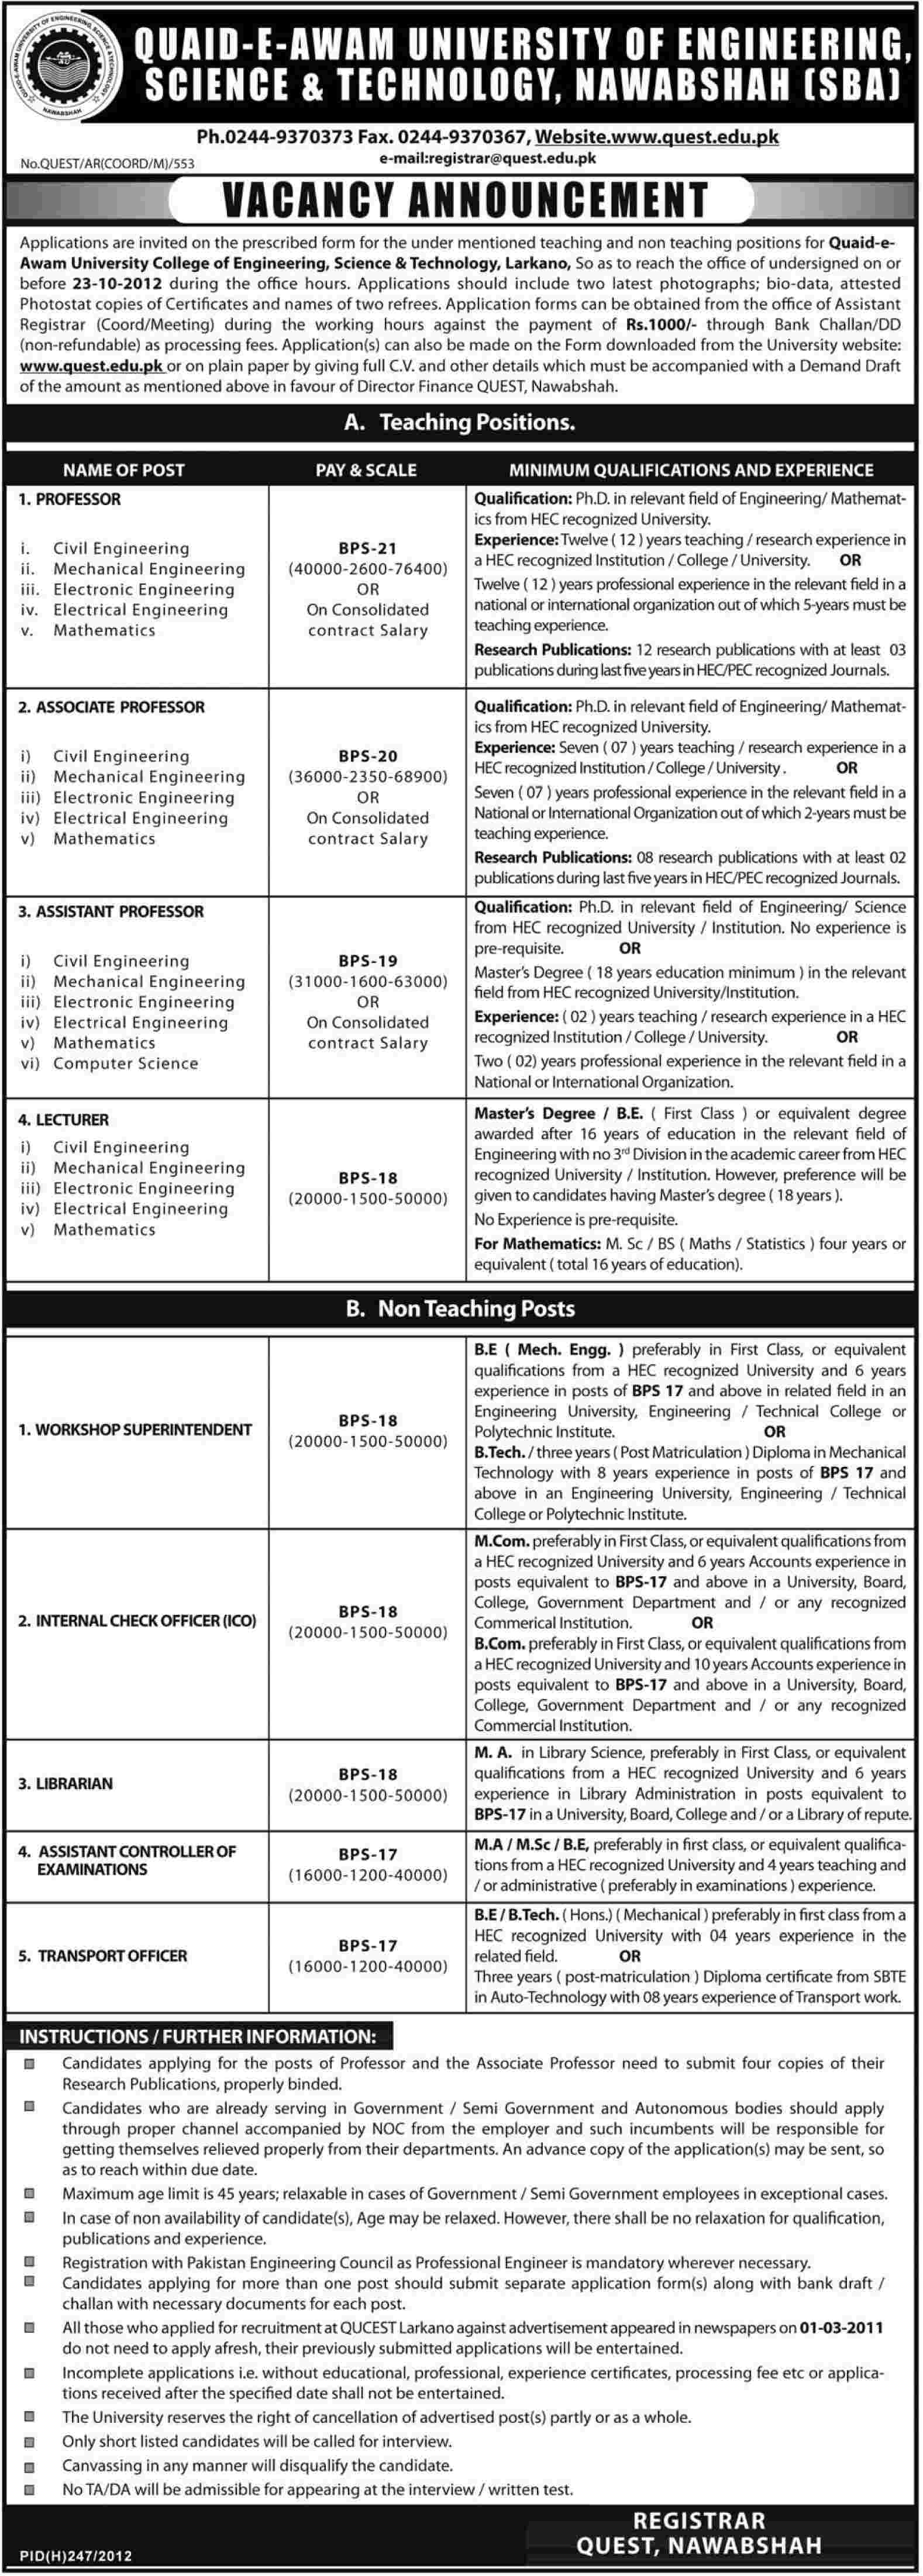 QUEST Quaid-e-Awam University of Engineering, Science and Technology Requries Teaching and Non-Teaching Faculty (Government Job)